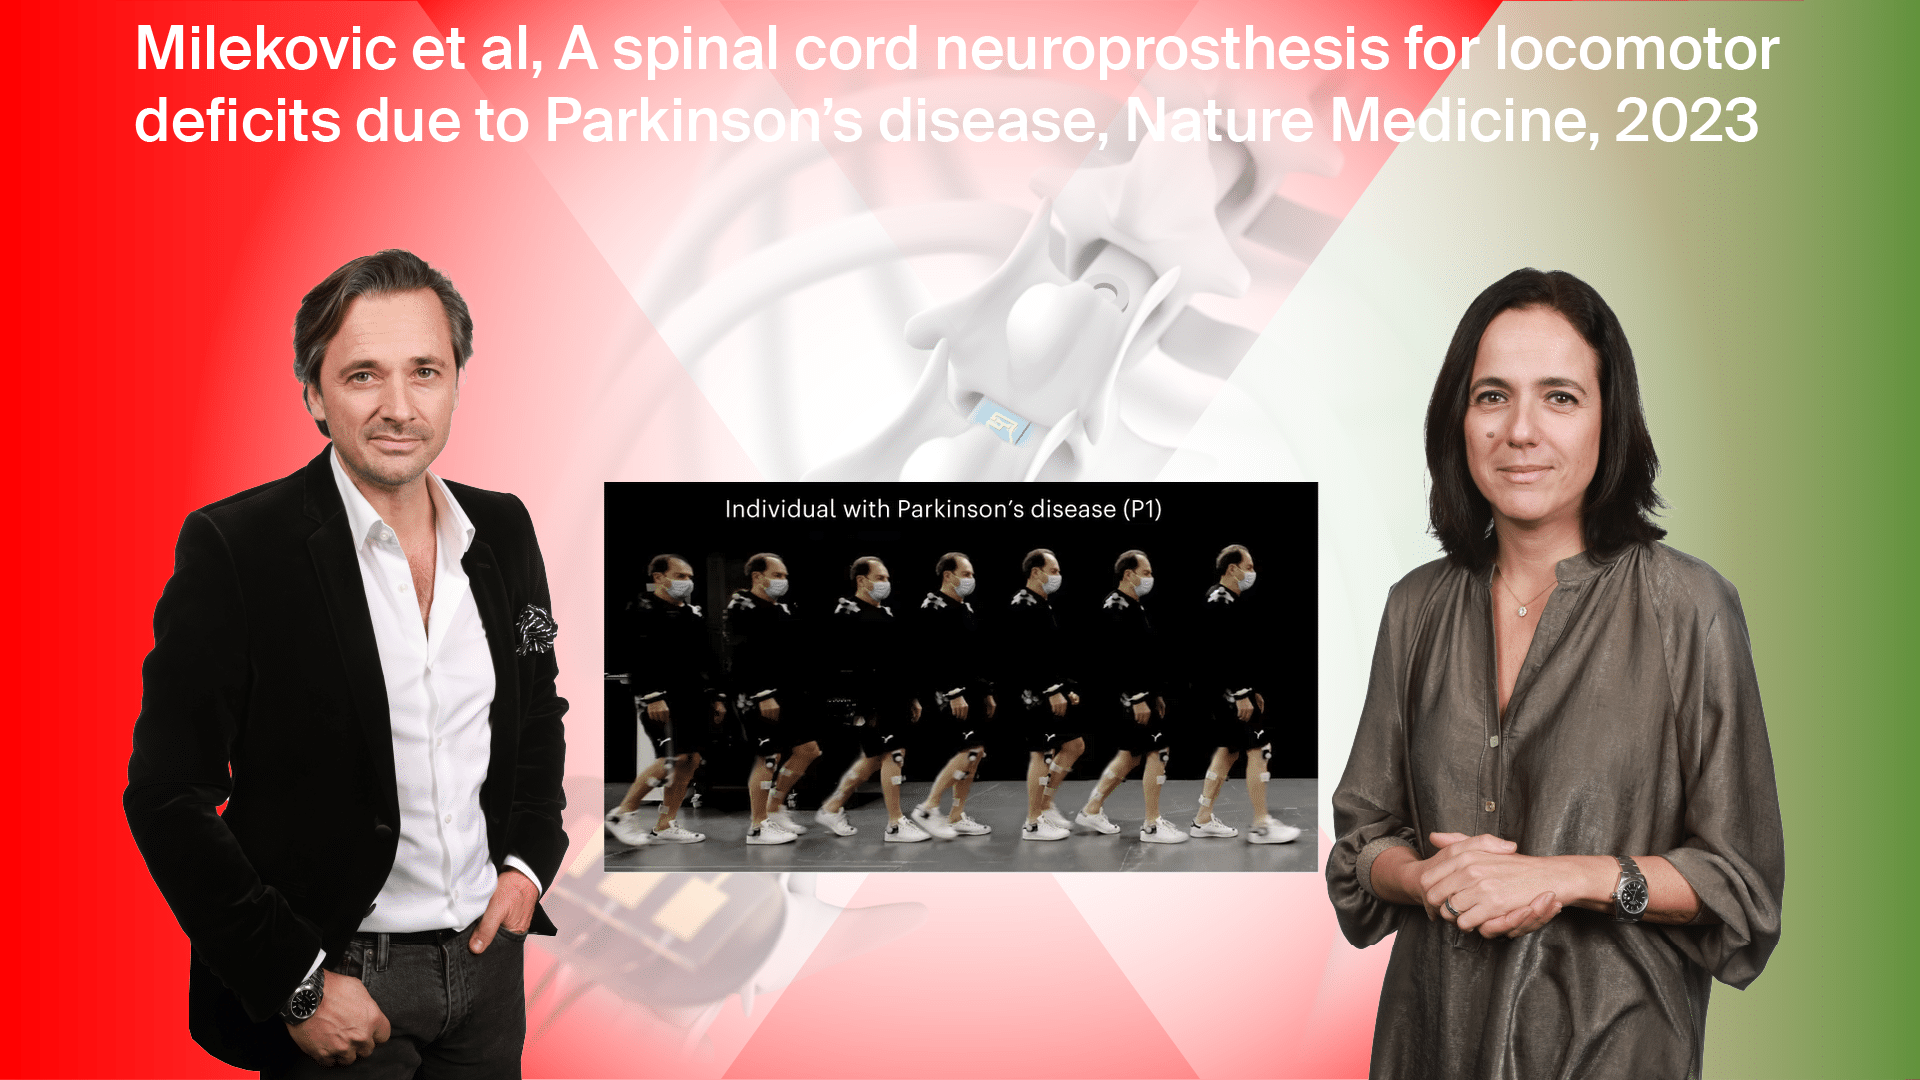 A spinal cord neuroprosthesis for locomotor deficits due to